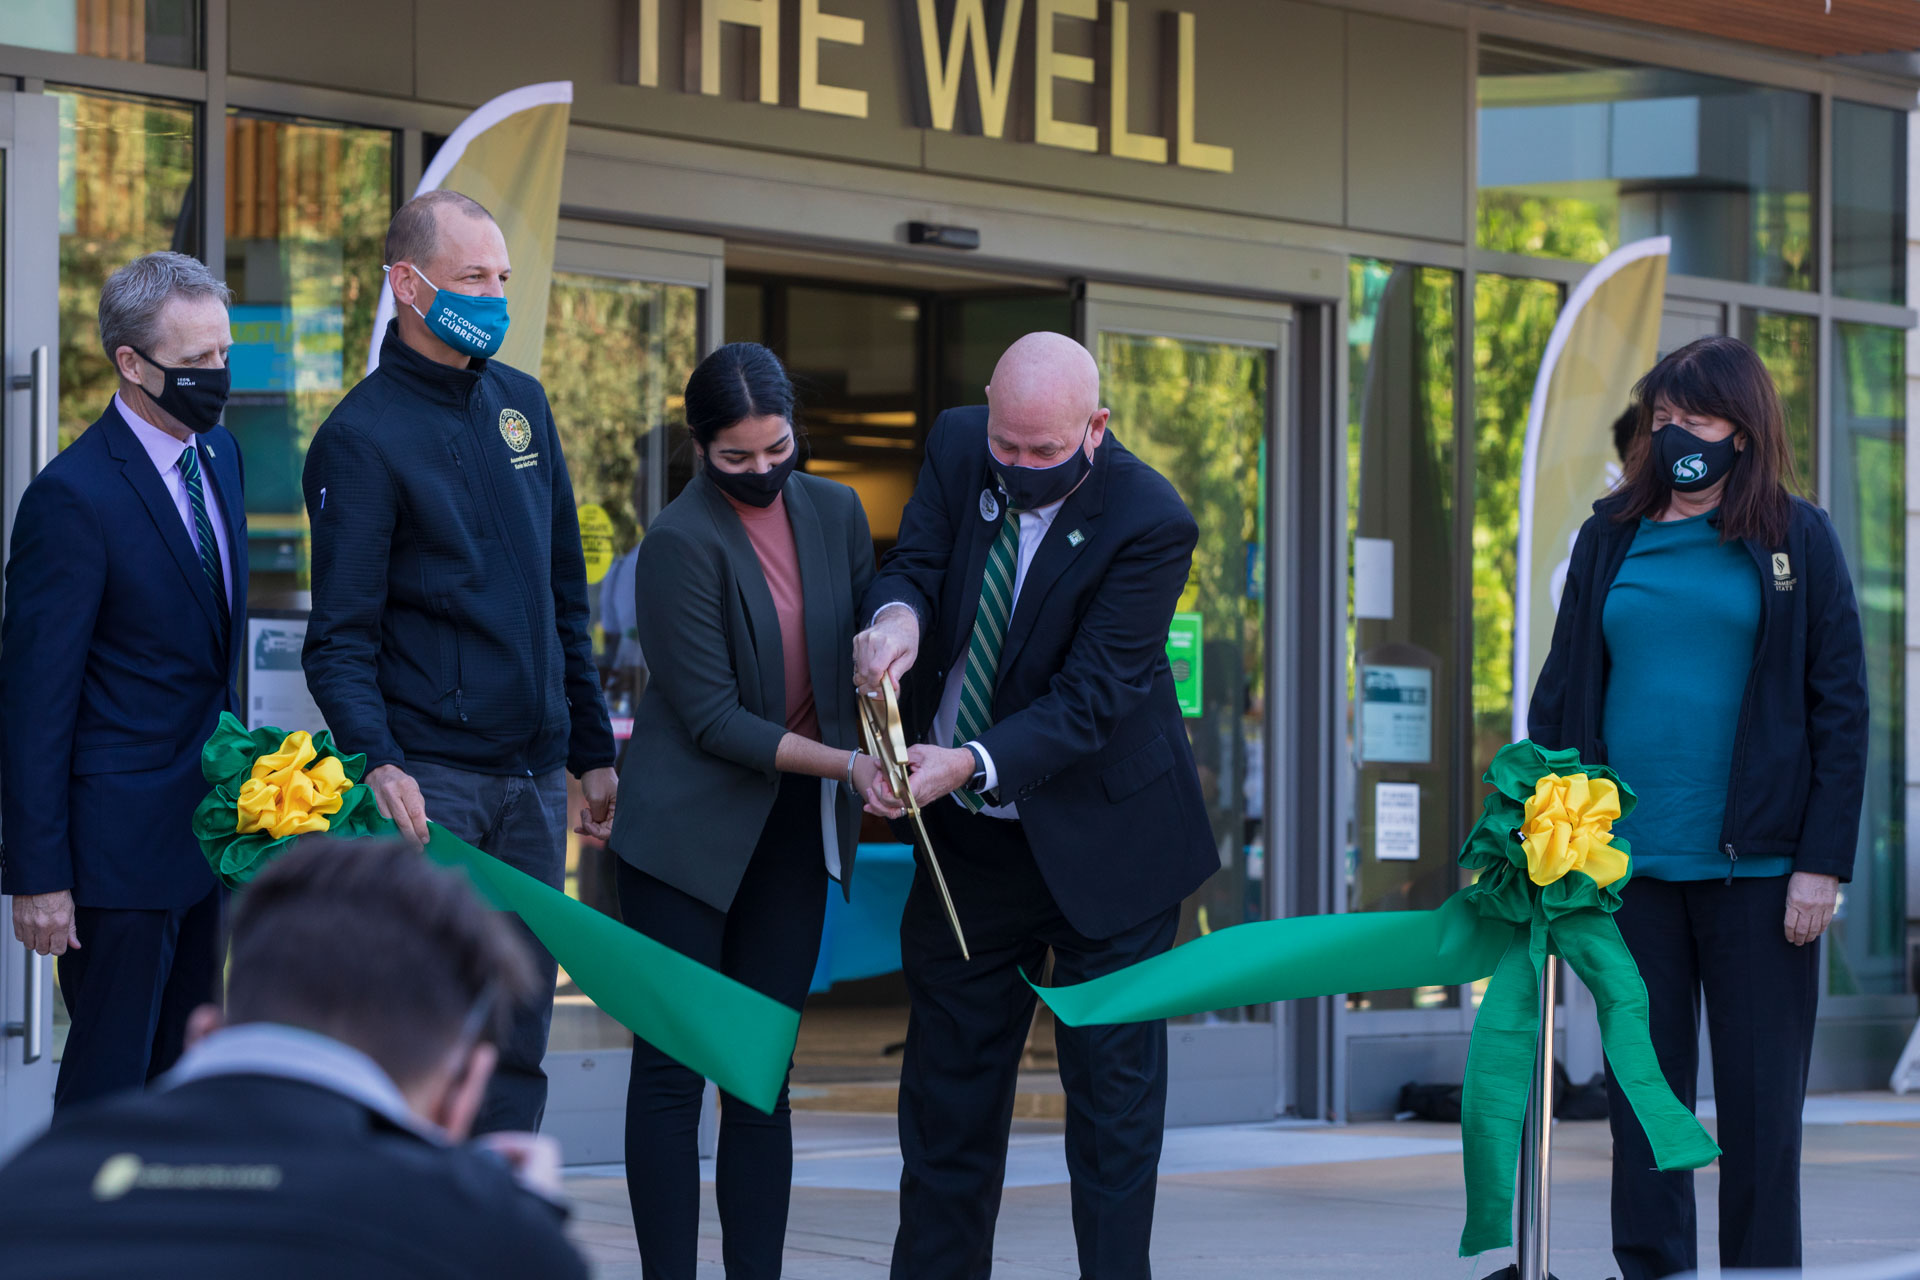 Two individuals cut a green ribbon with a large, gold pair of scissors, as three others look on, in front of The WELL